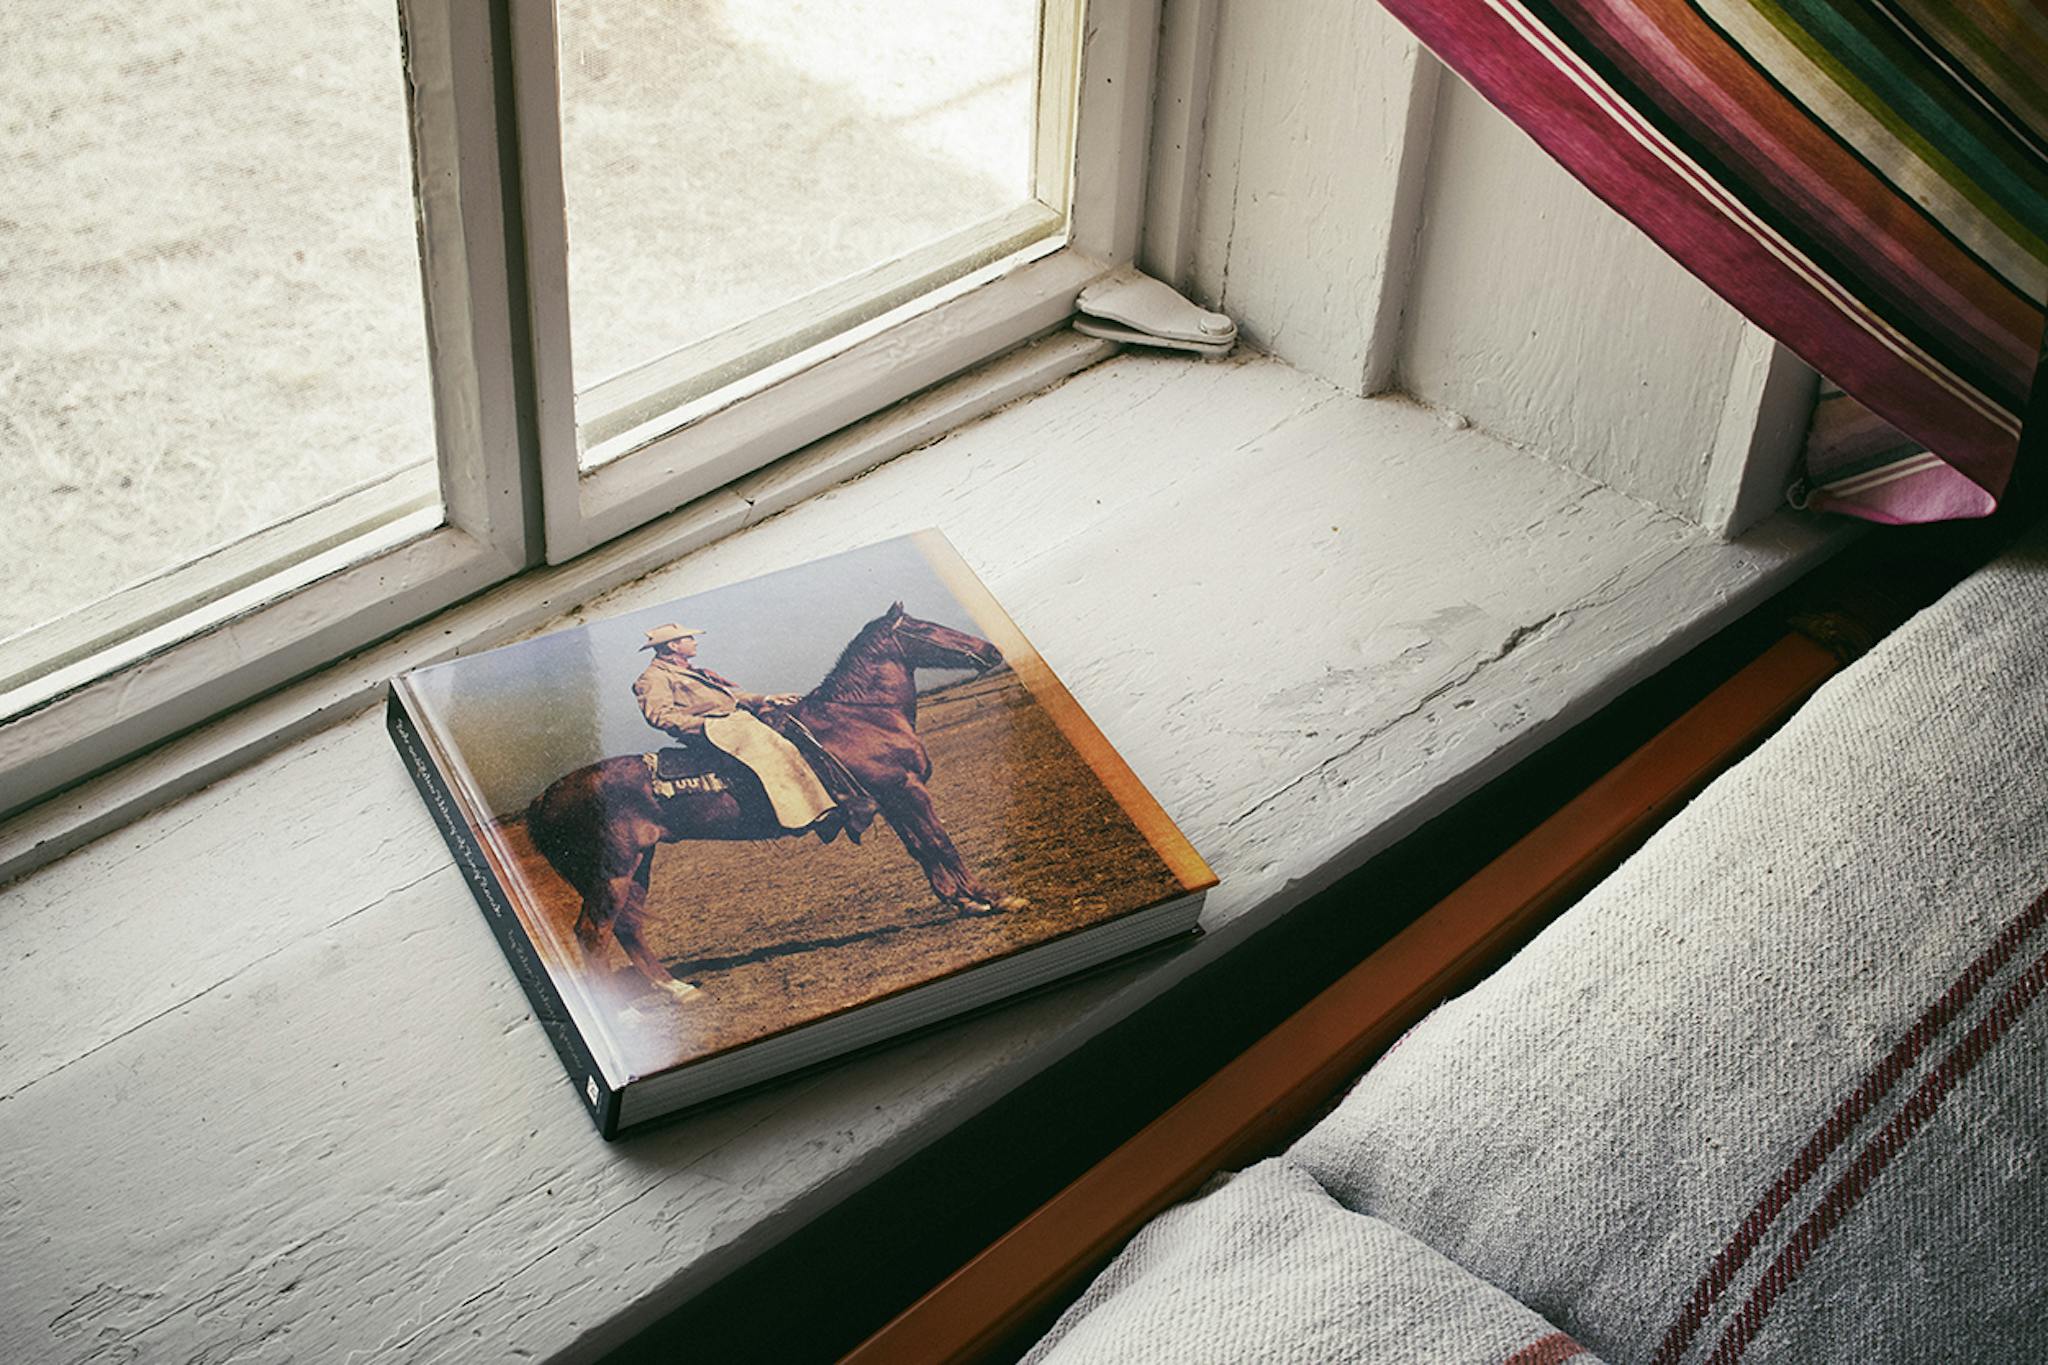 Book cover of a man on horseback rests on a window sill.